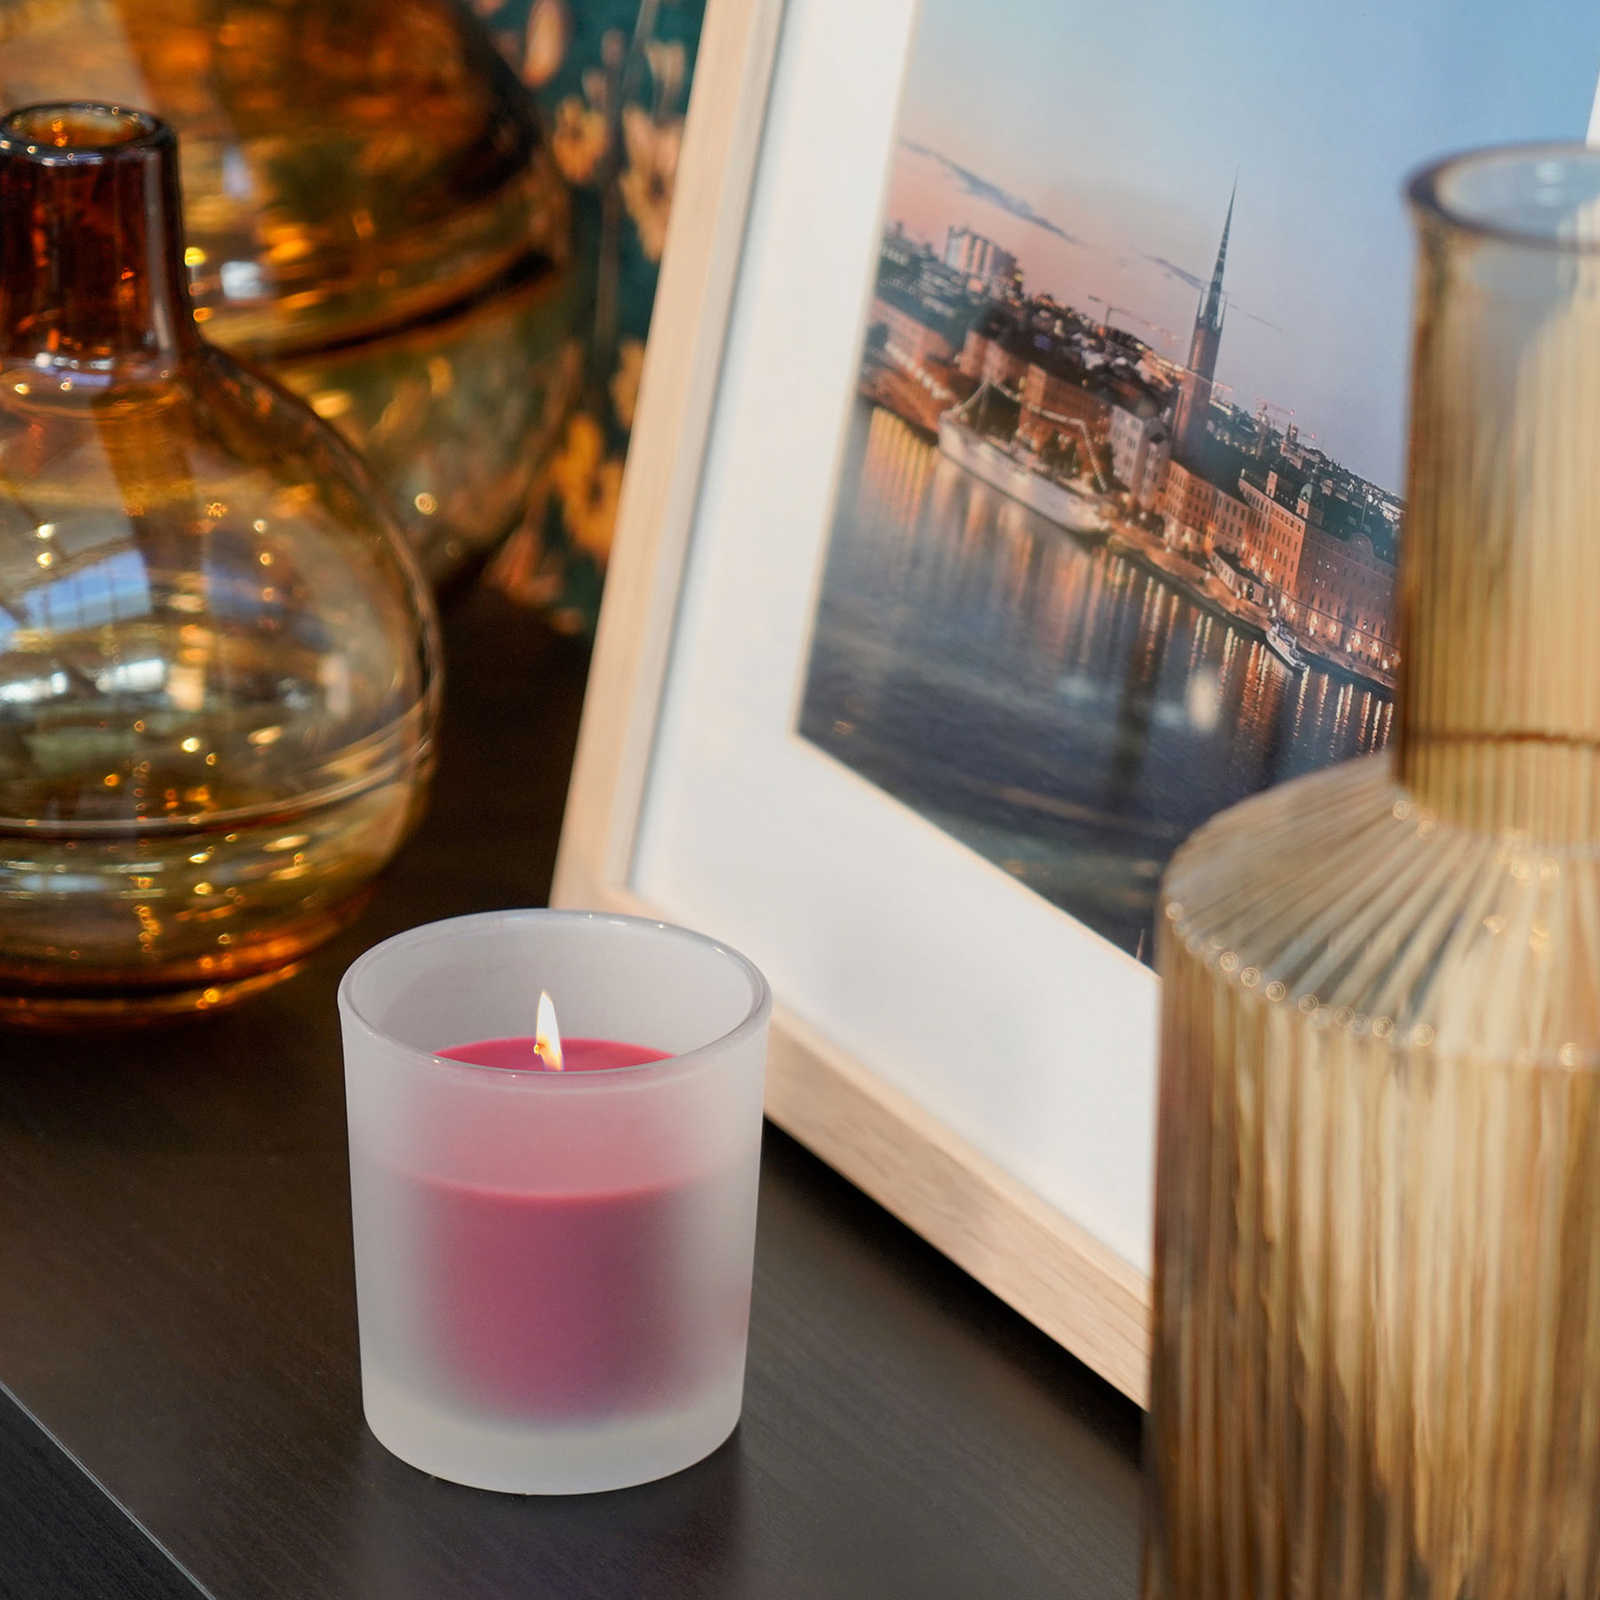         Raspberry scented candle with sweet scent - 110g
    